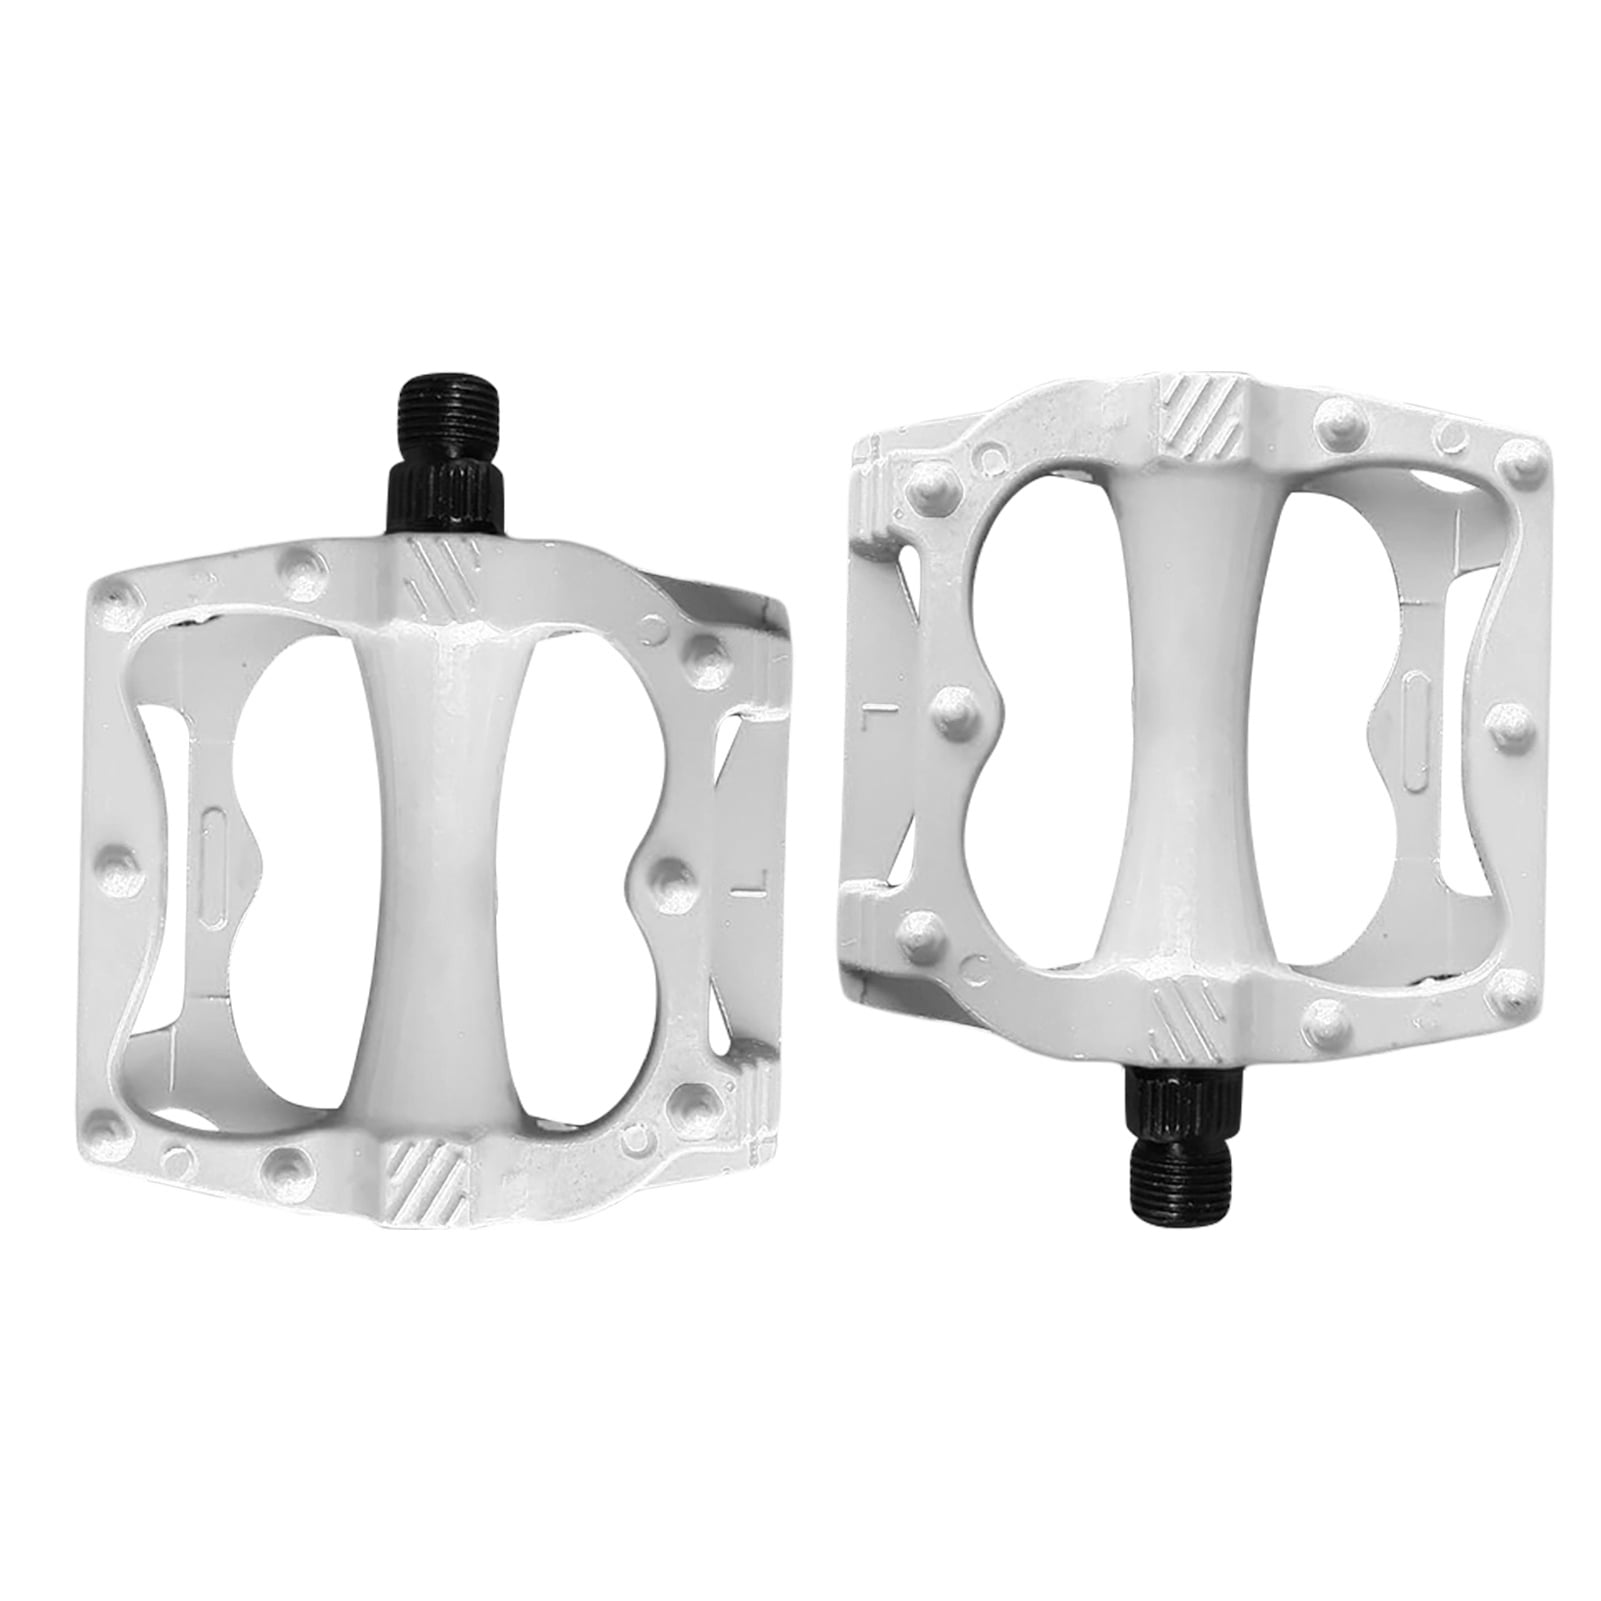 Details about   1 Pair Bicycle Bearing Pedals MTB Road Bike Aluminum Alloy Flat Platform